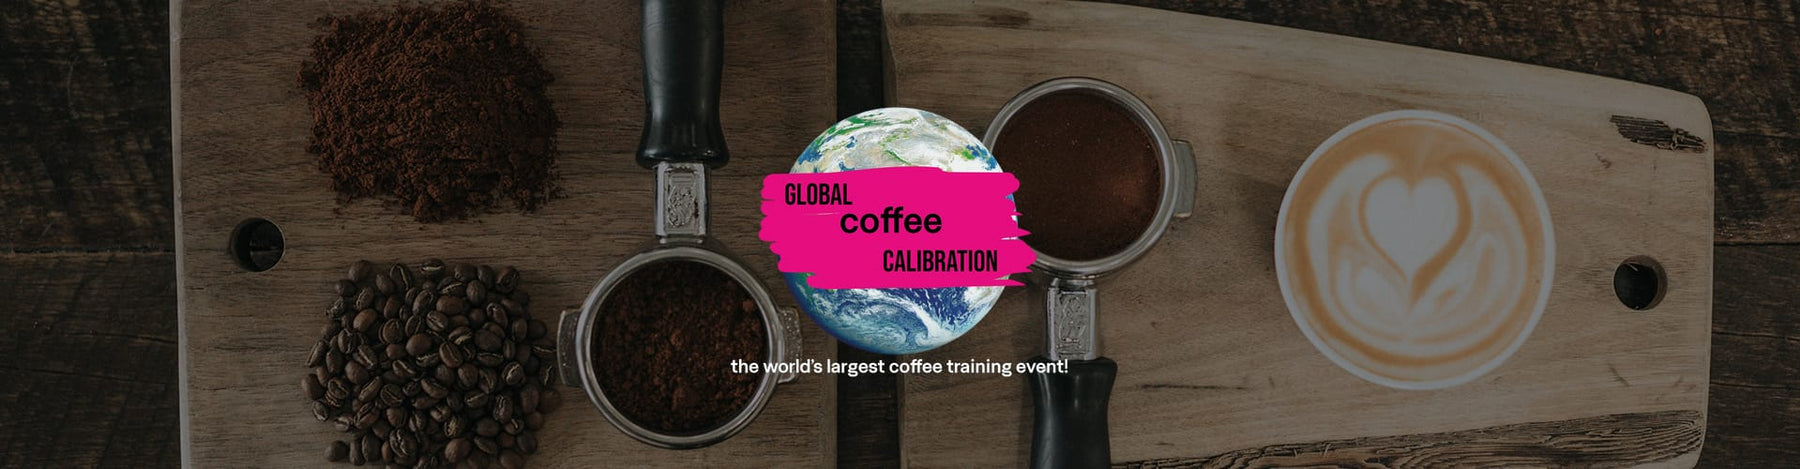 Join the Global Coffee Calibration: A day of learning and fundraising for coffee lovers.